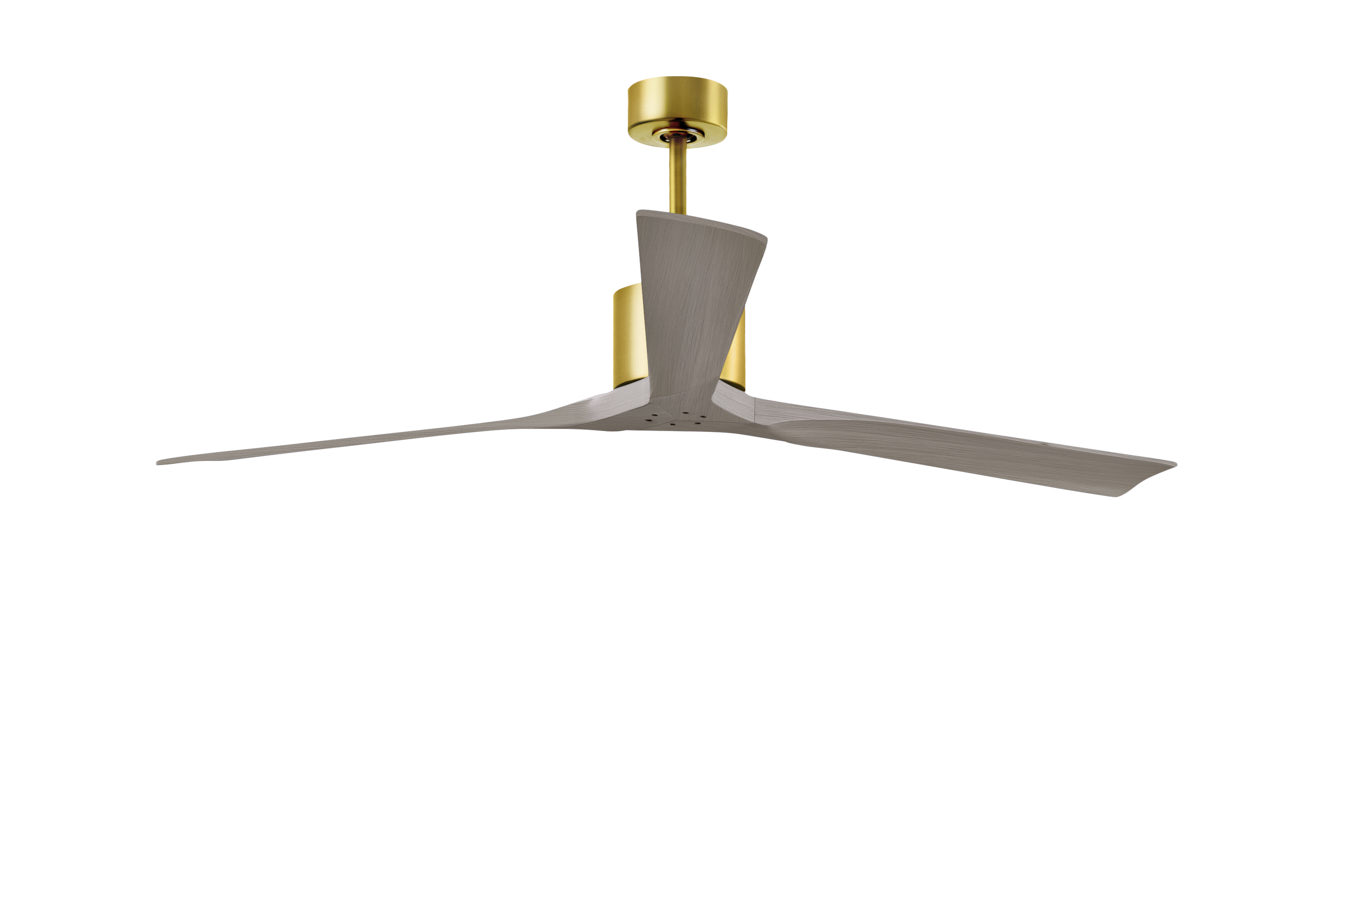 Nan XL ceiling fan in Brushed Brass with 72” Gray Ash blades